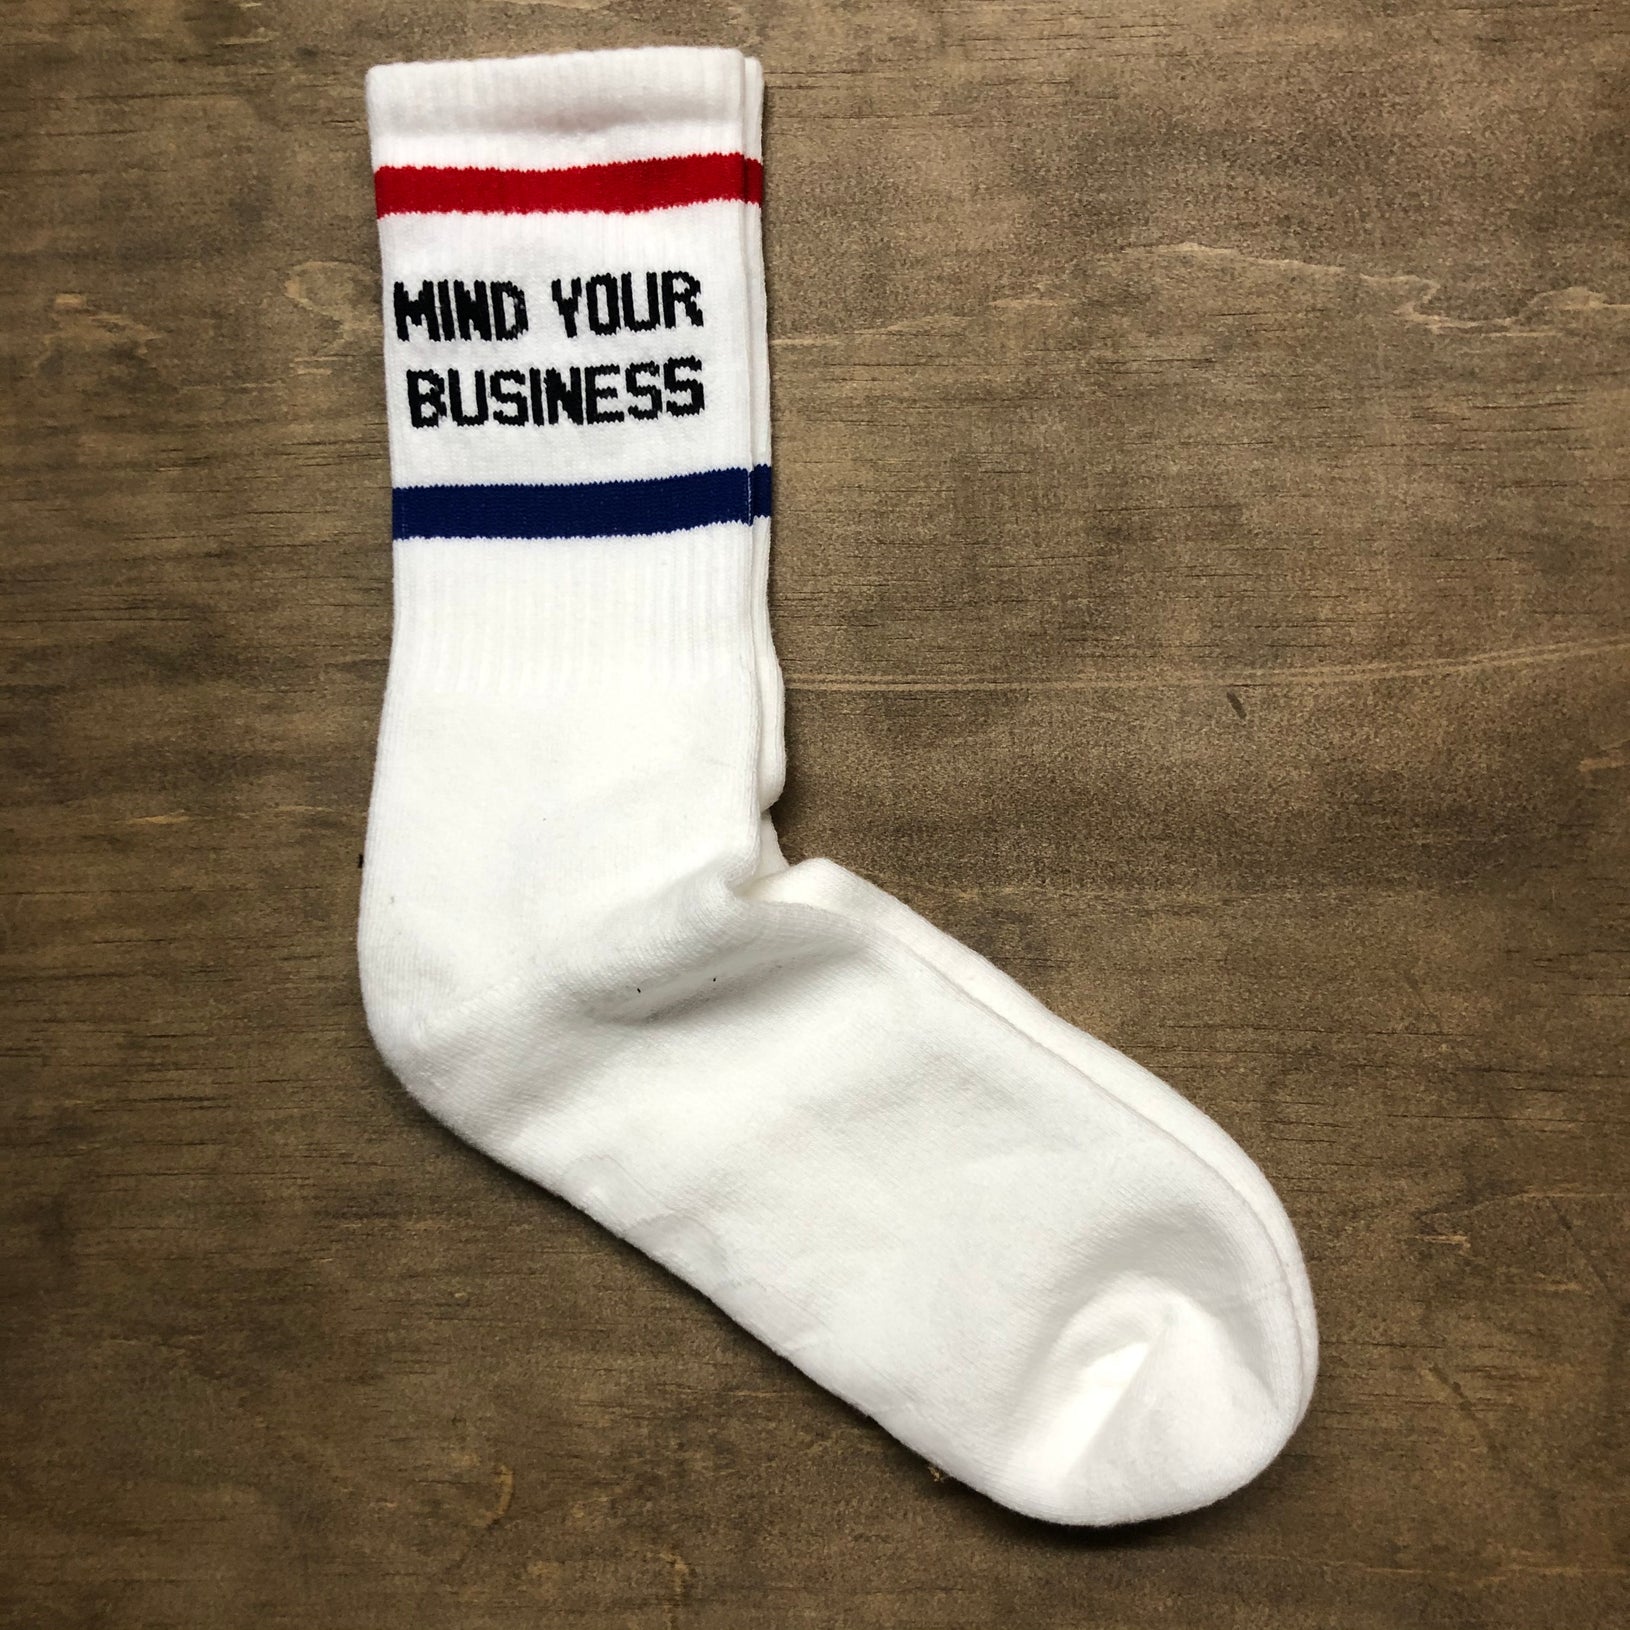 Mind Your Business White w/ Red and Blue Socks